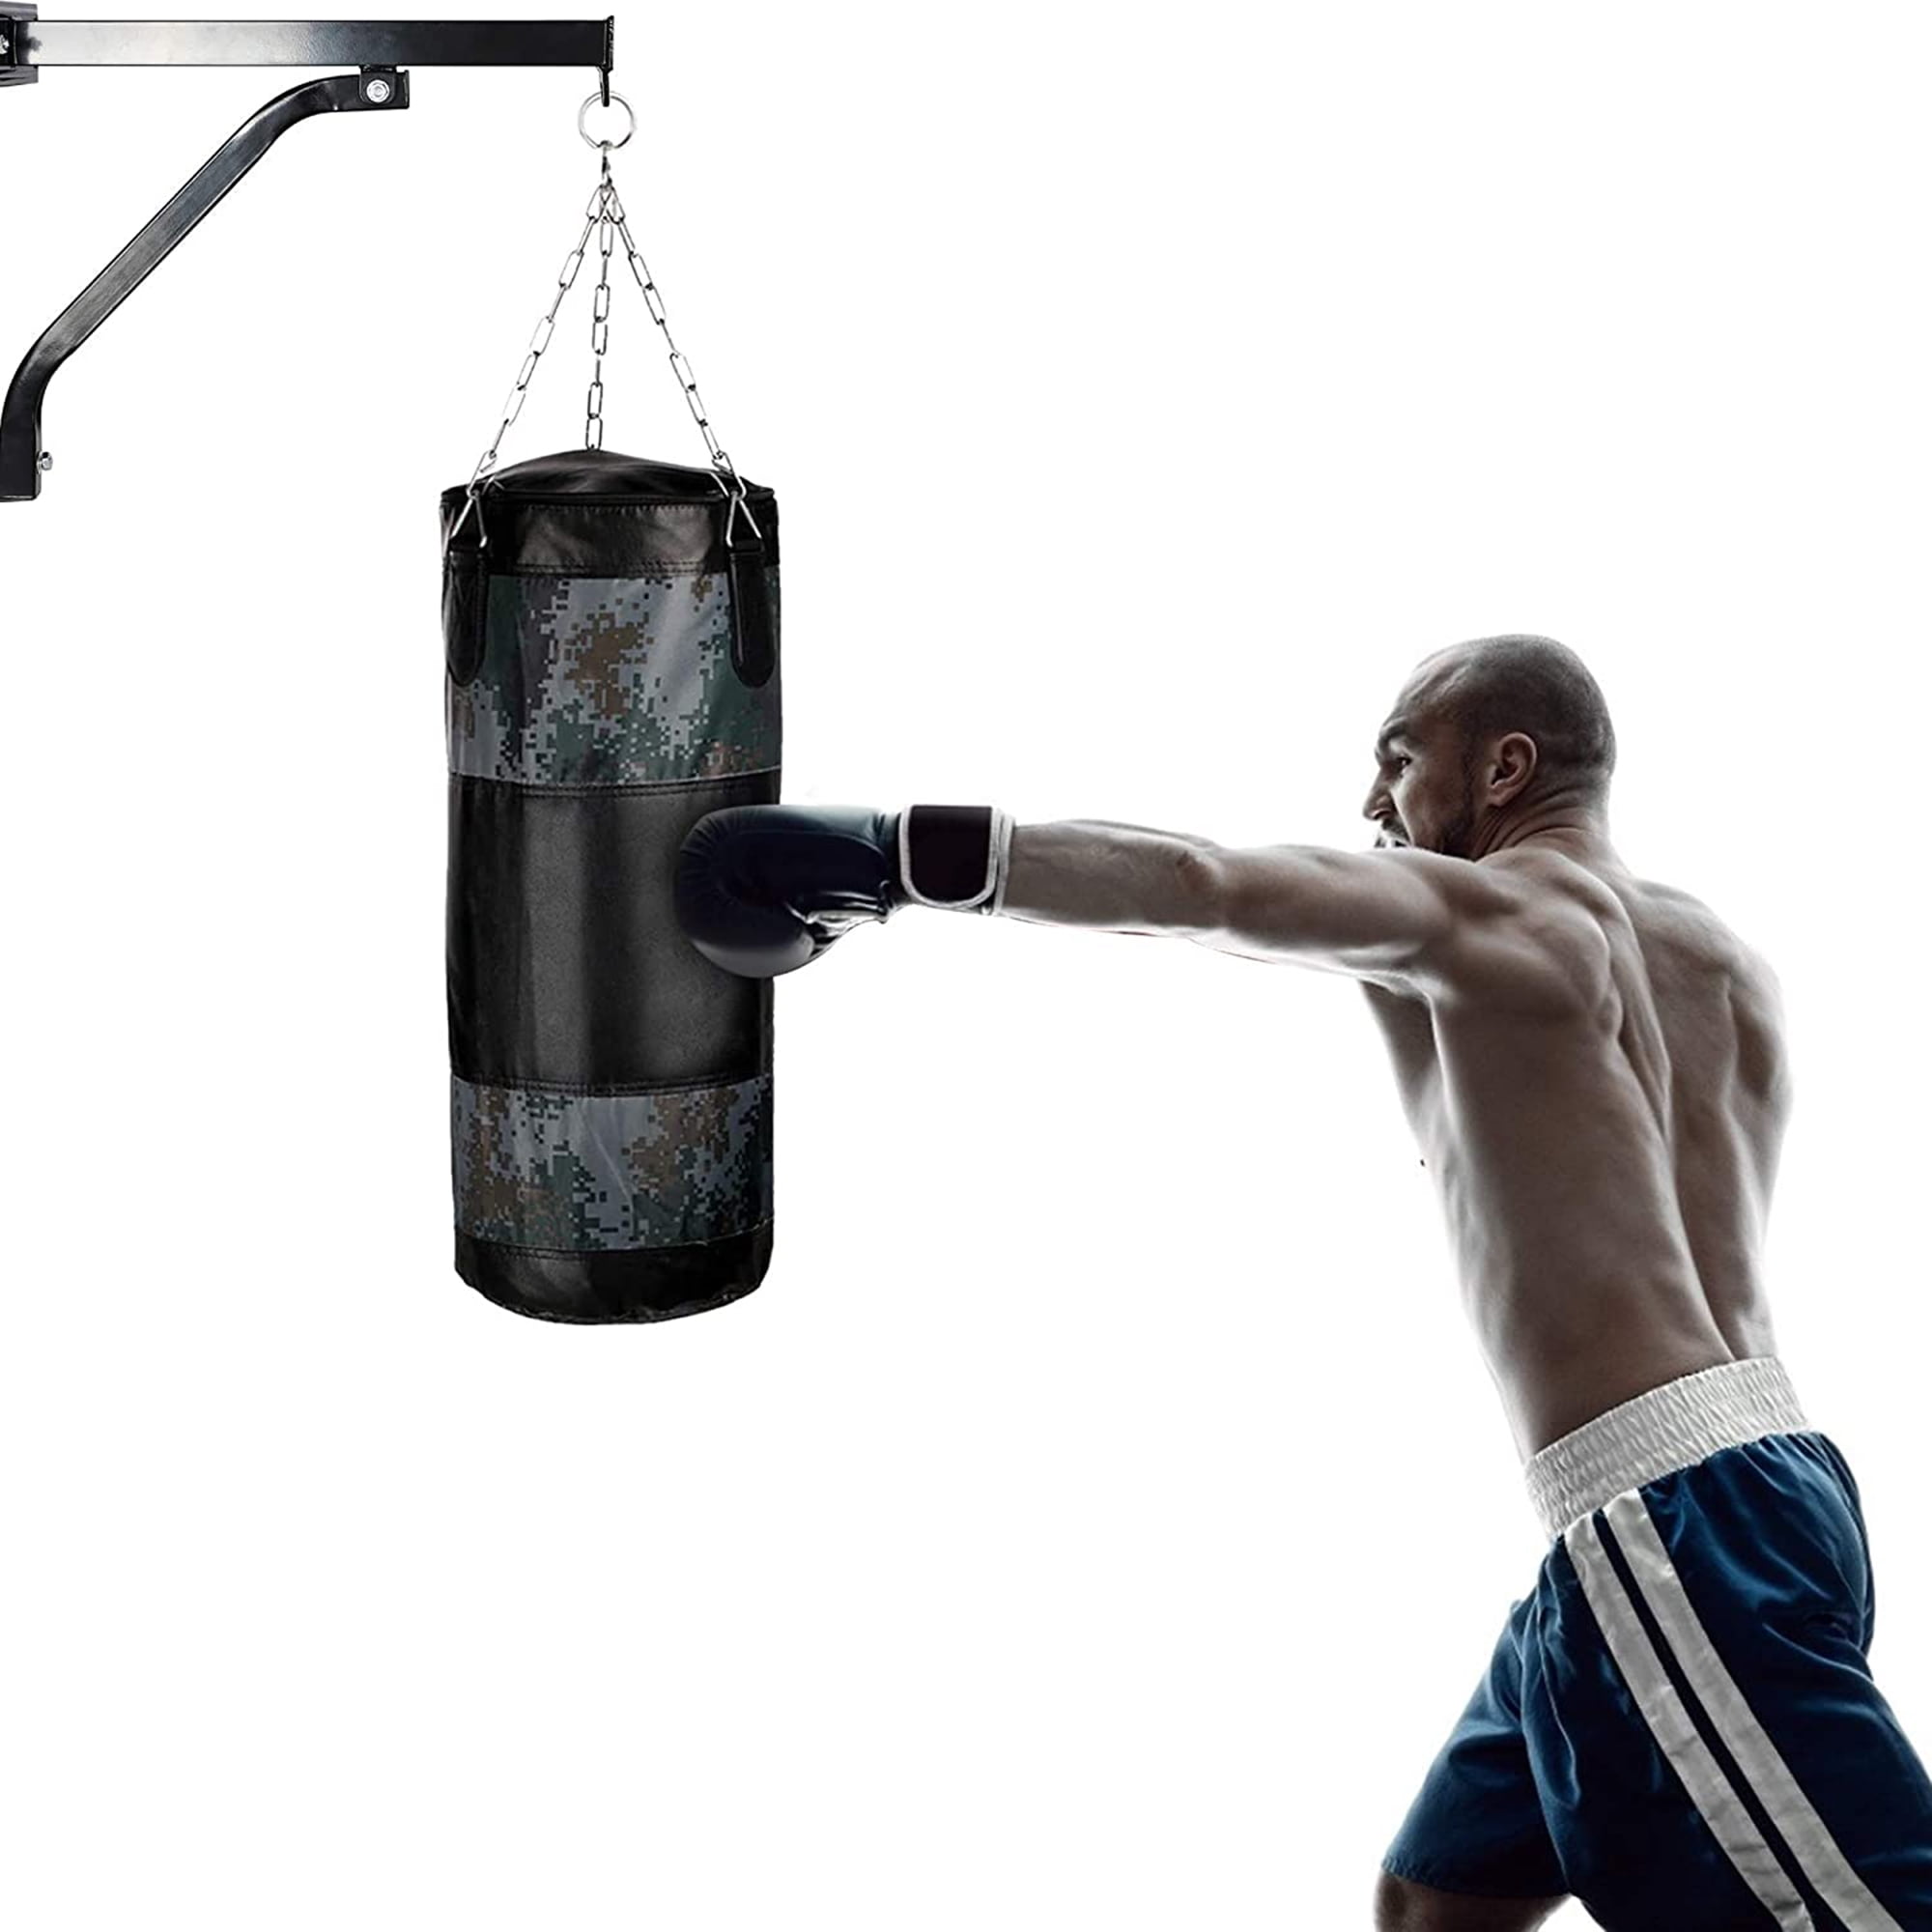 Punch Bag Bracket Wall Mount Heavy Duty Boxing Bag Hanger Punch Focus Speed Stands Steel Frame Ceiling Hook Rack MMA Training Home Gym Excersice Fitness Hand Wraps Men Women Bandages Gift